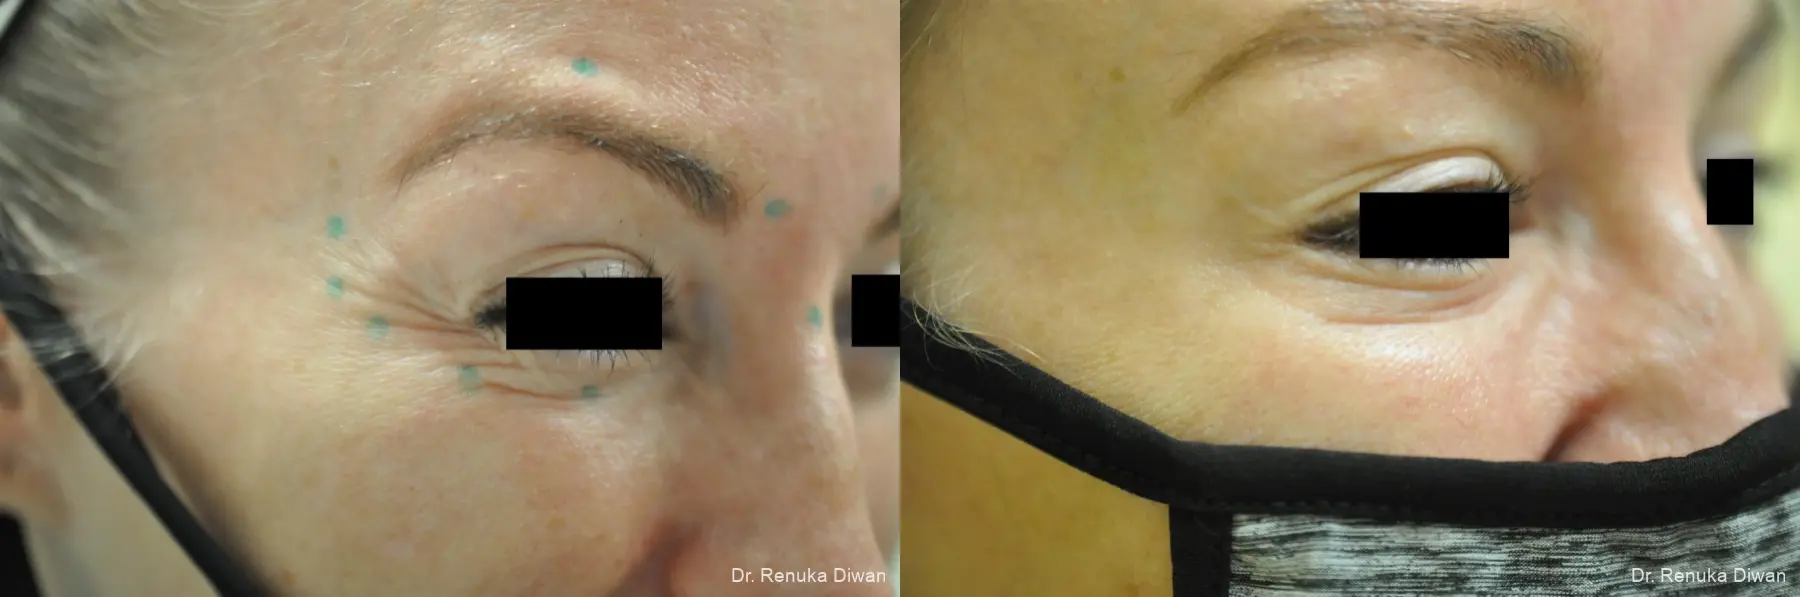 Crows Feet Creases: Patient 6 - Before and After  